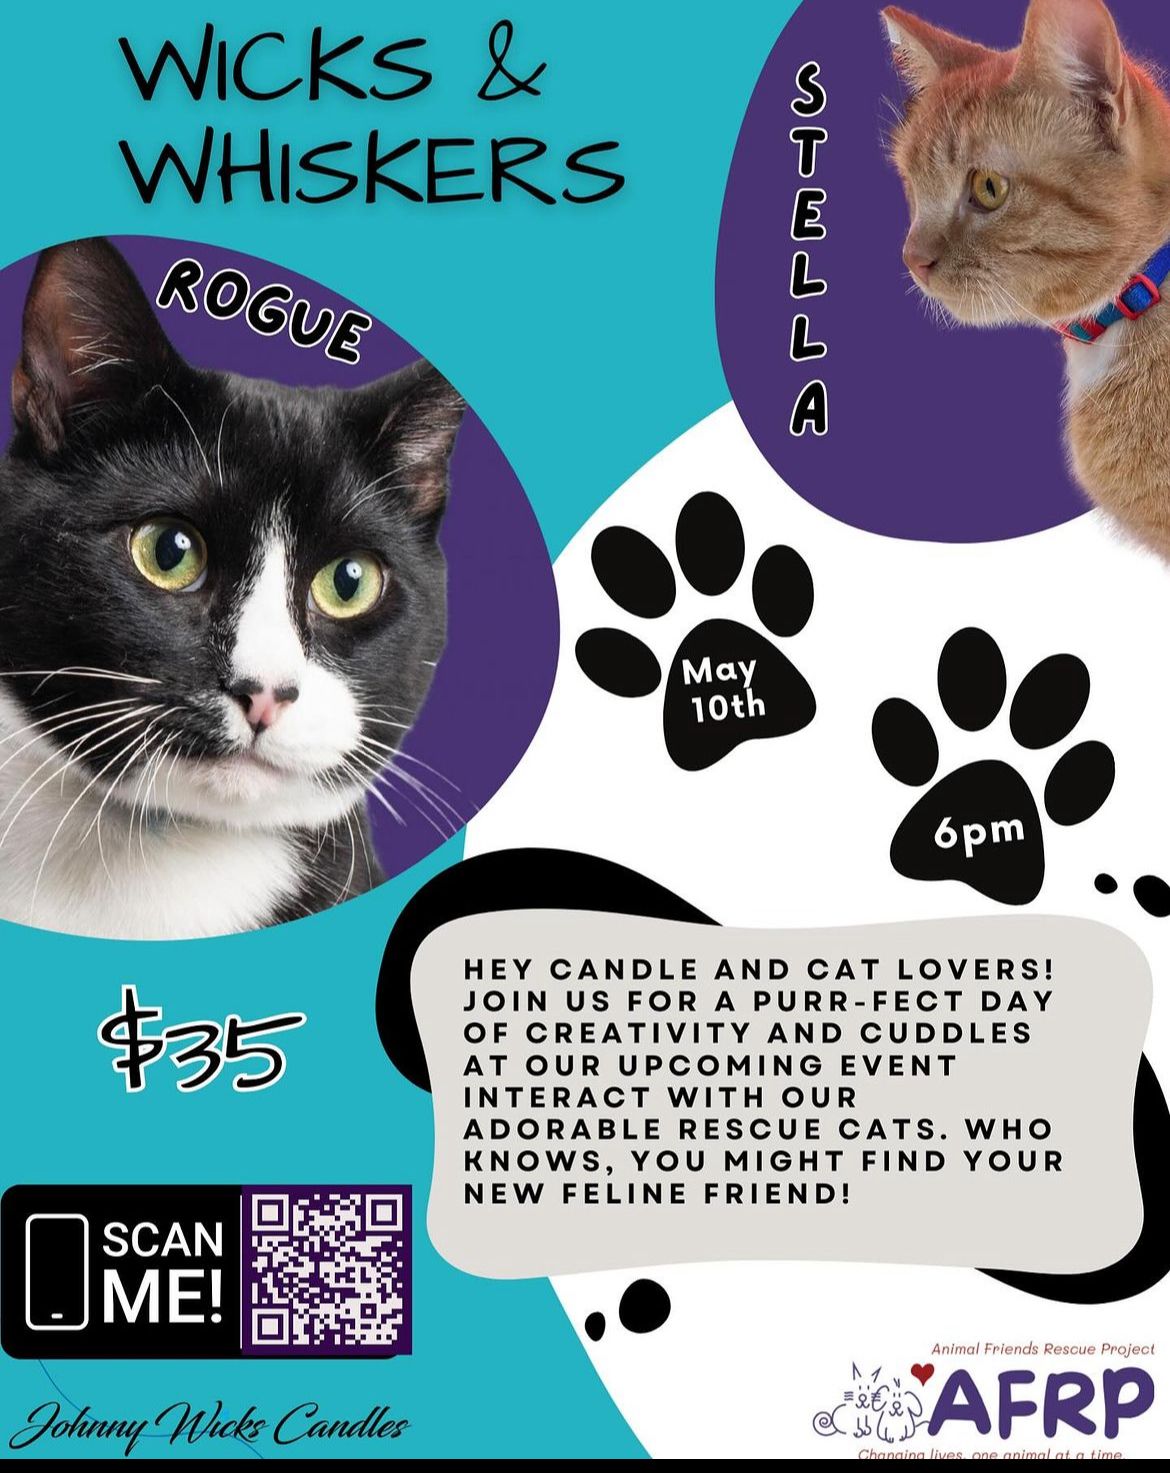 Wicks & Whiskers Candle Fundraiser